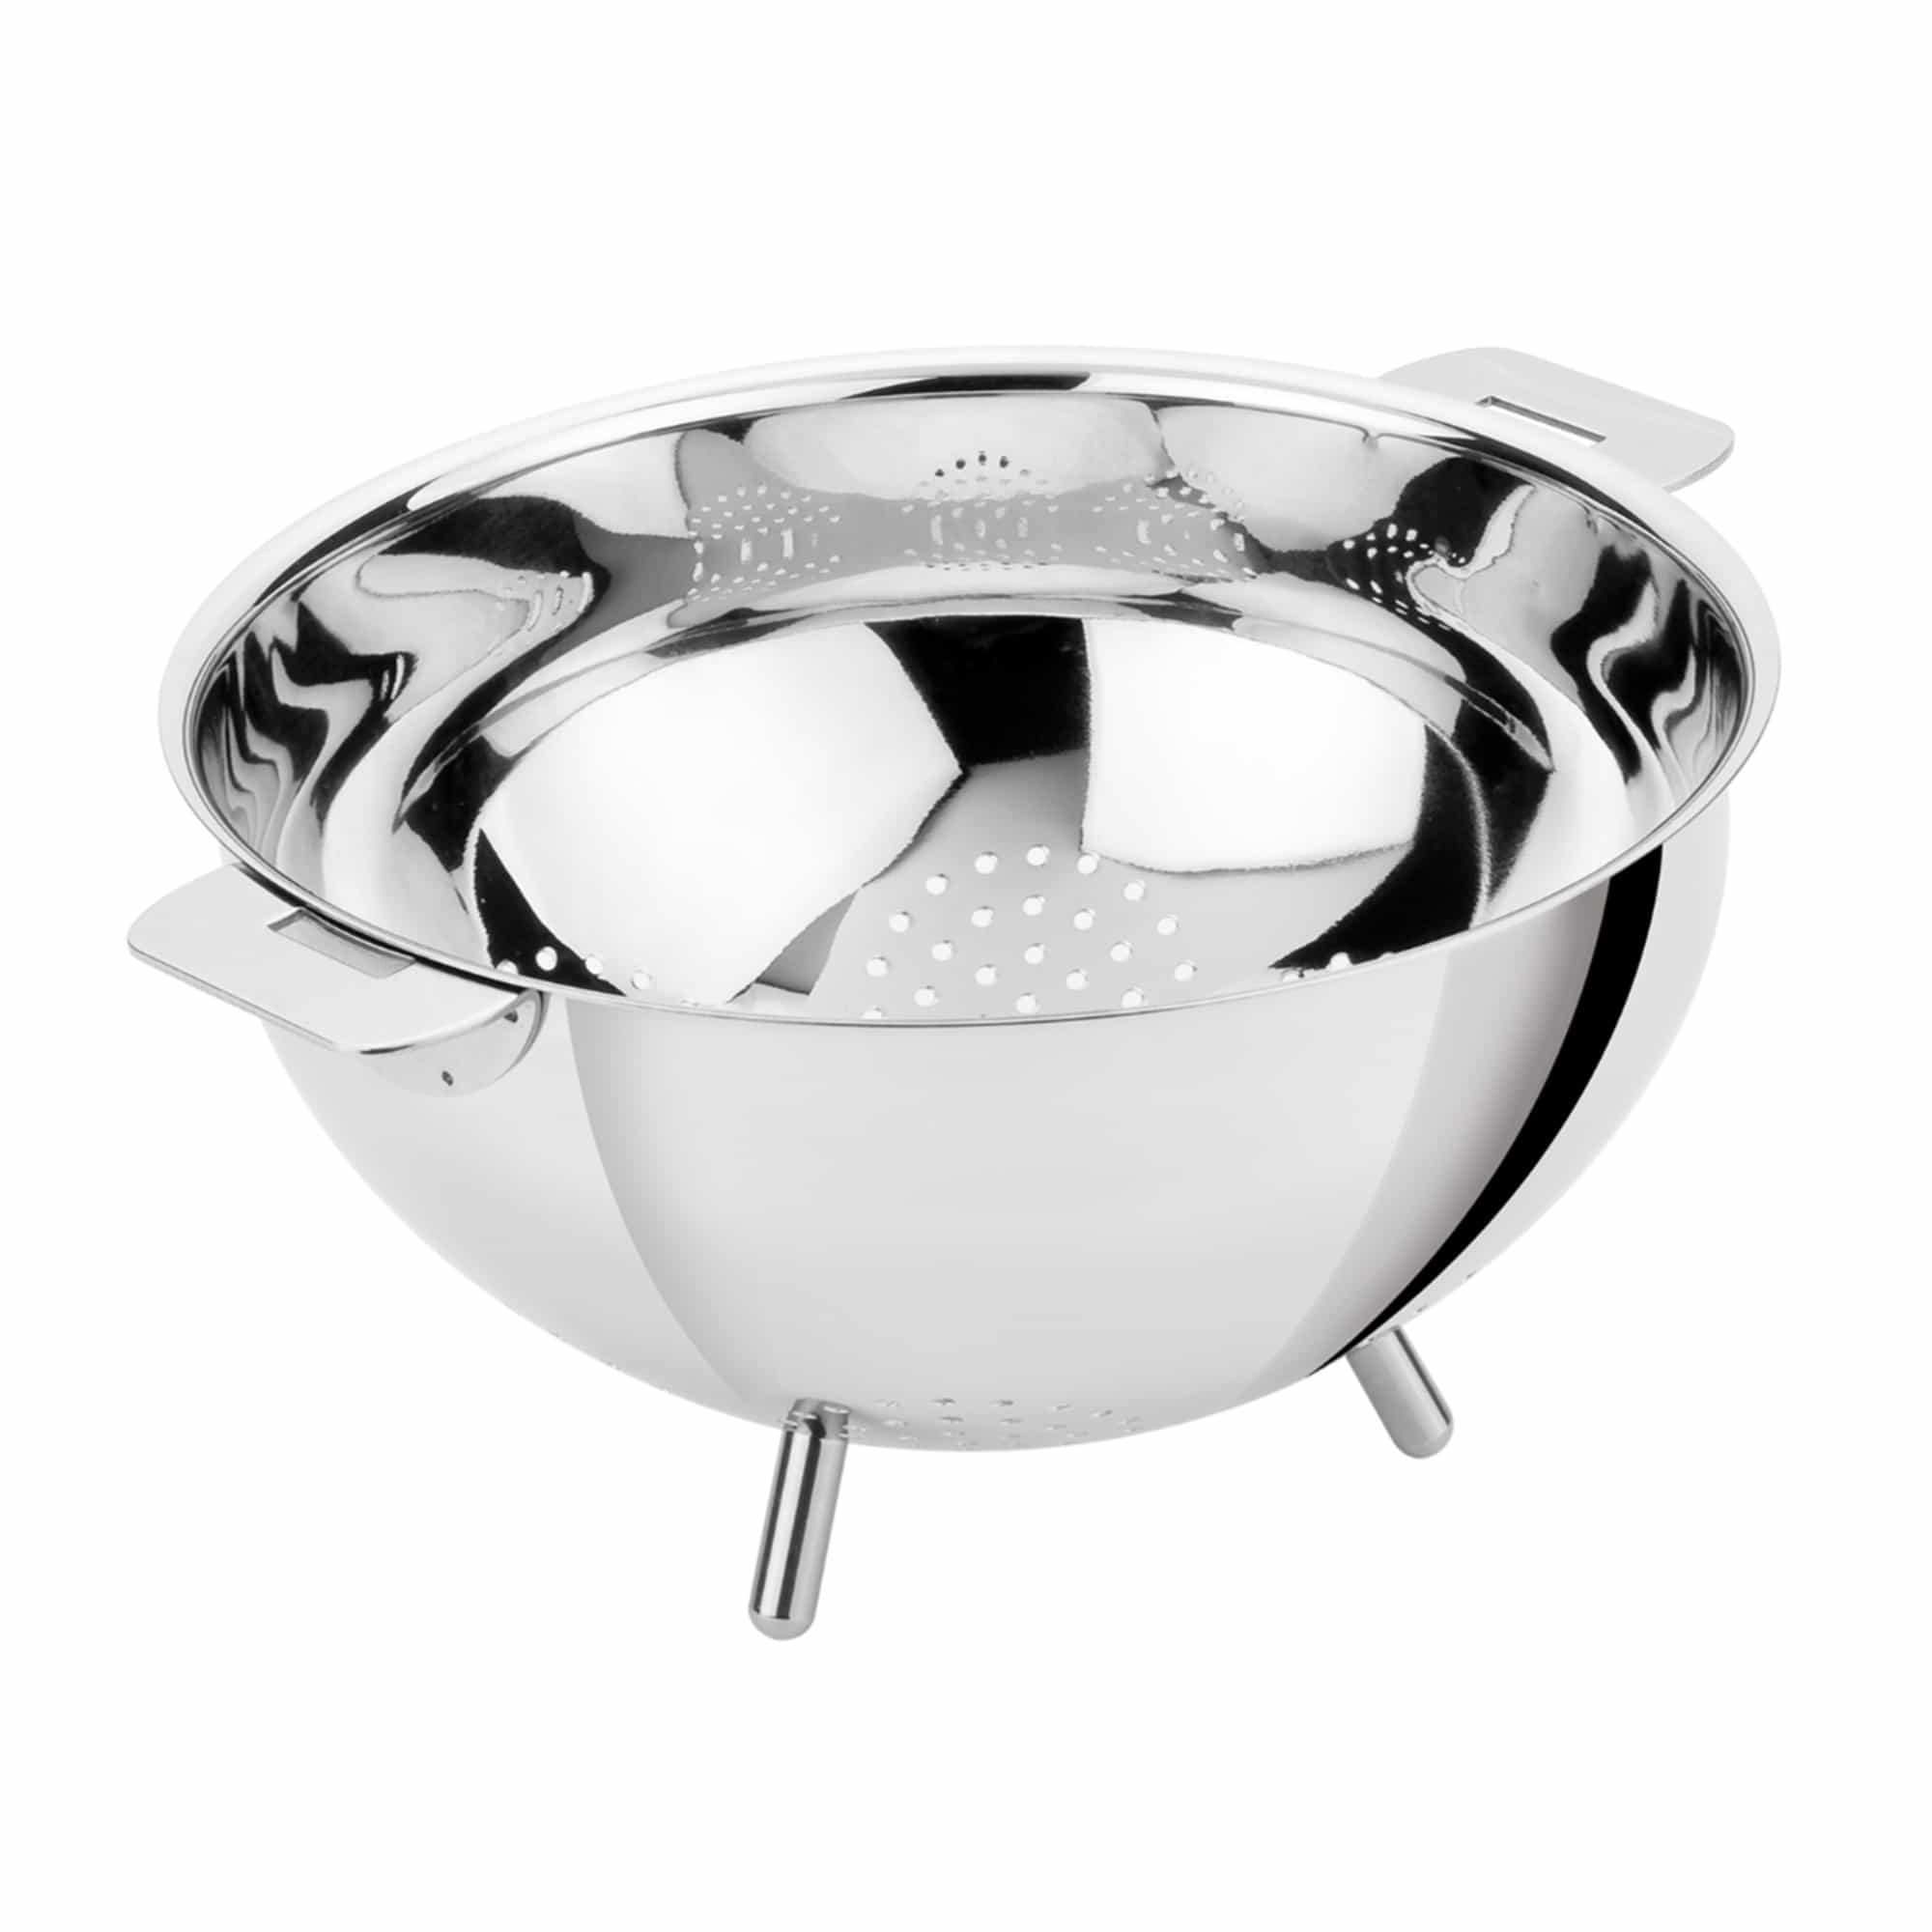 Mutine Removable Sieve With Feet